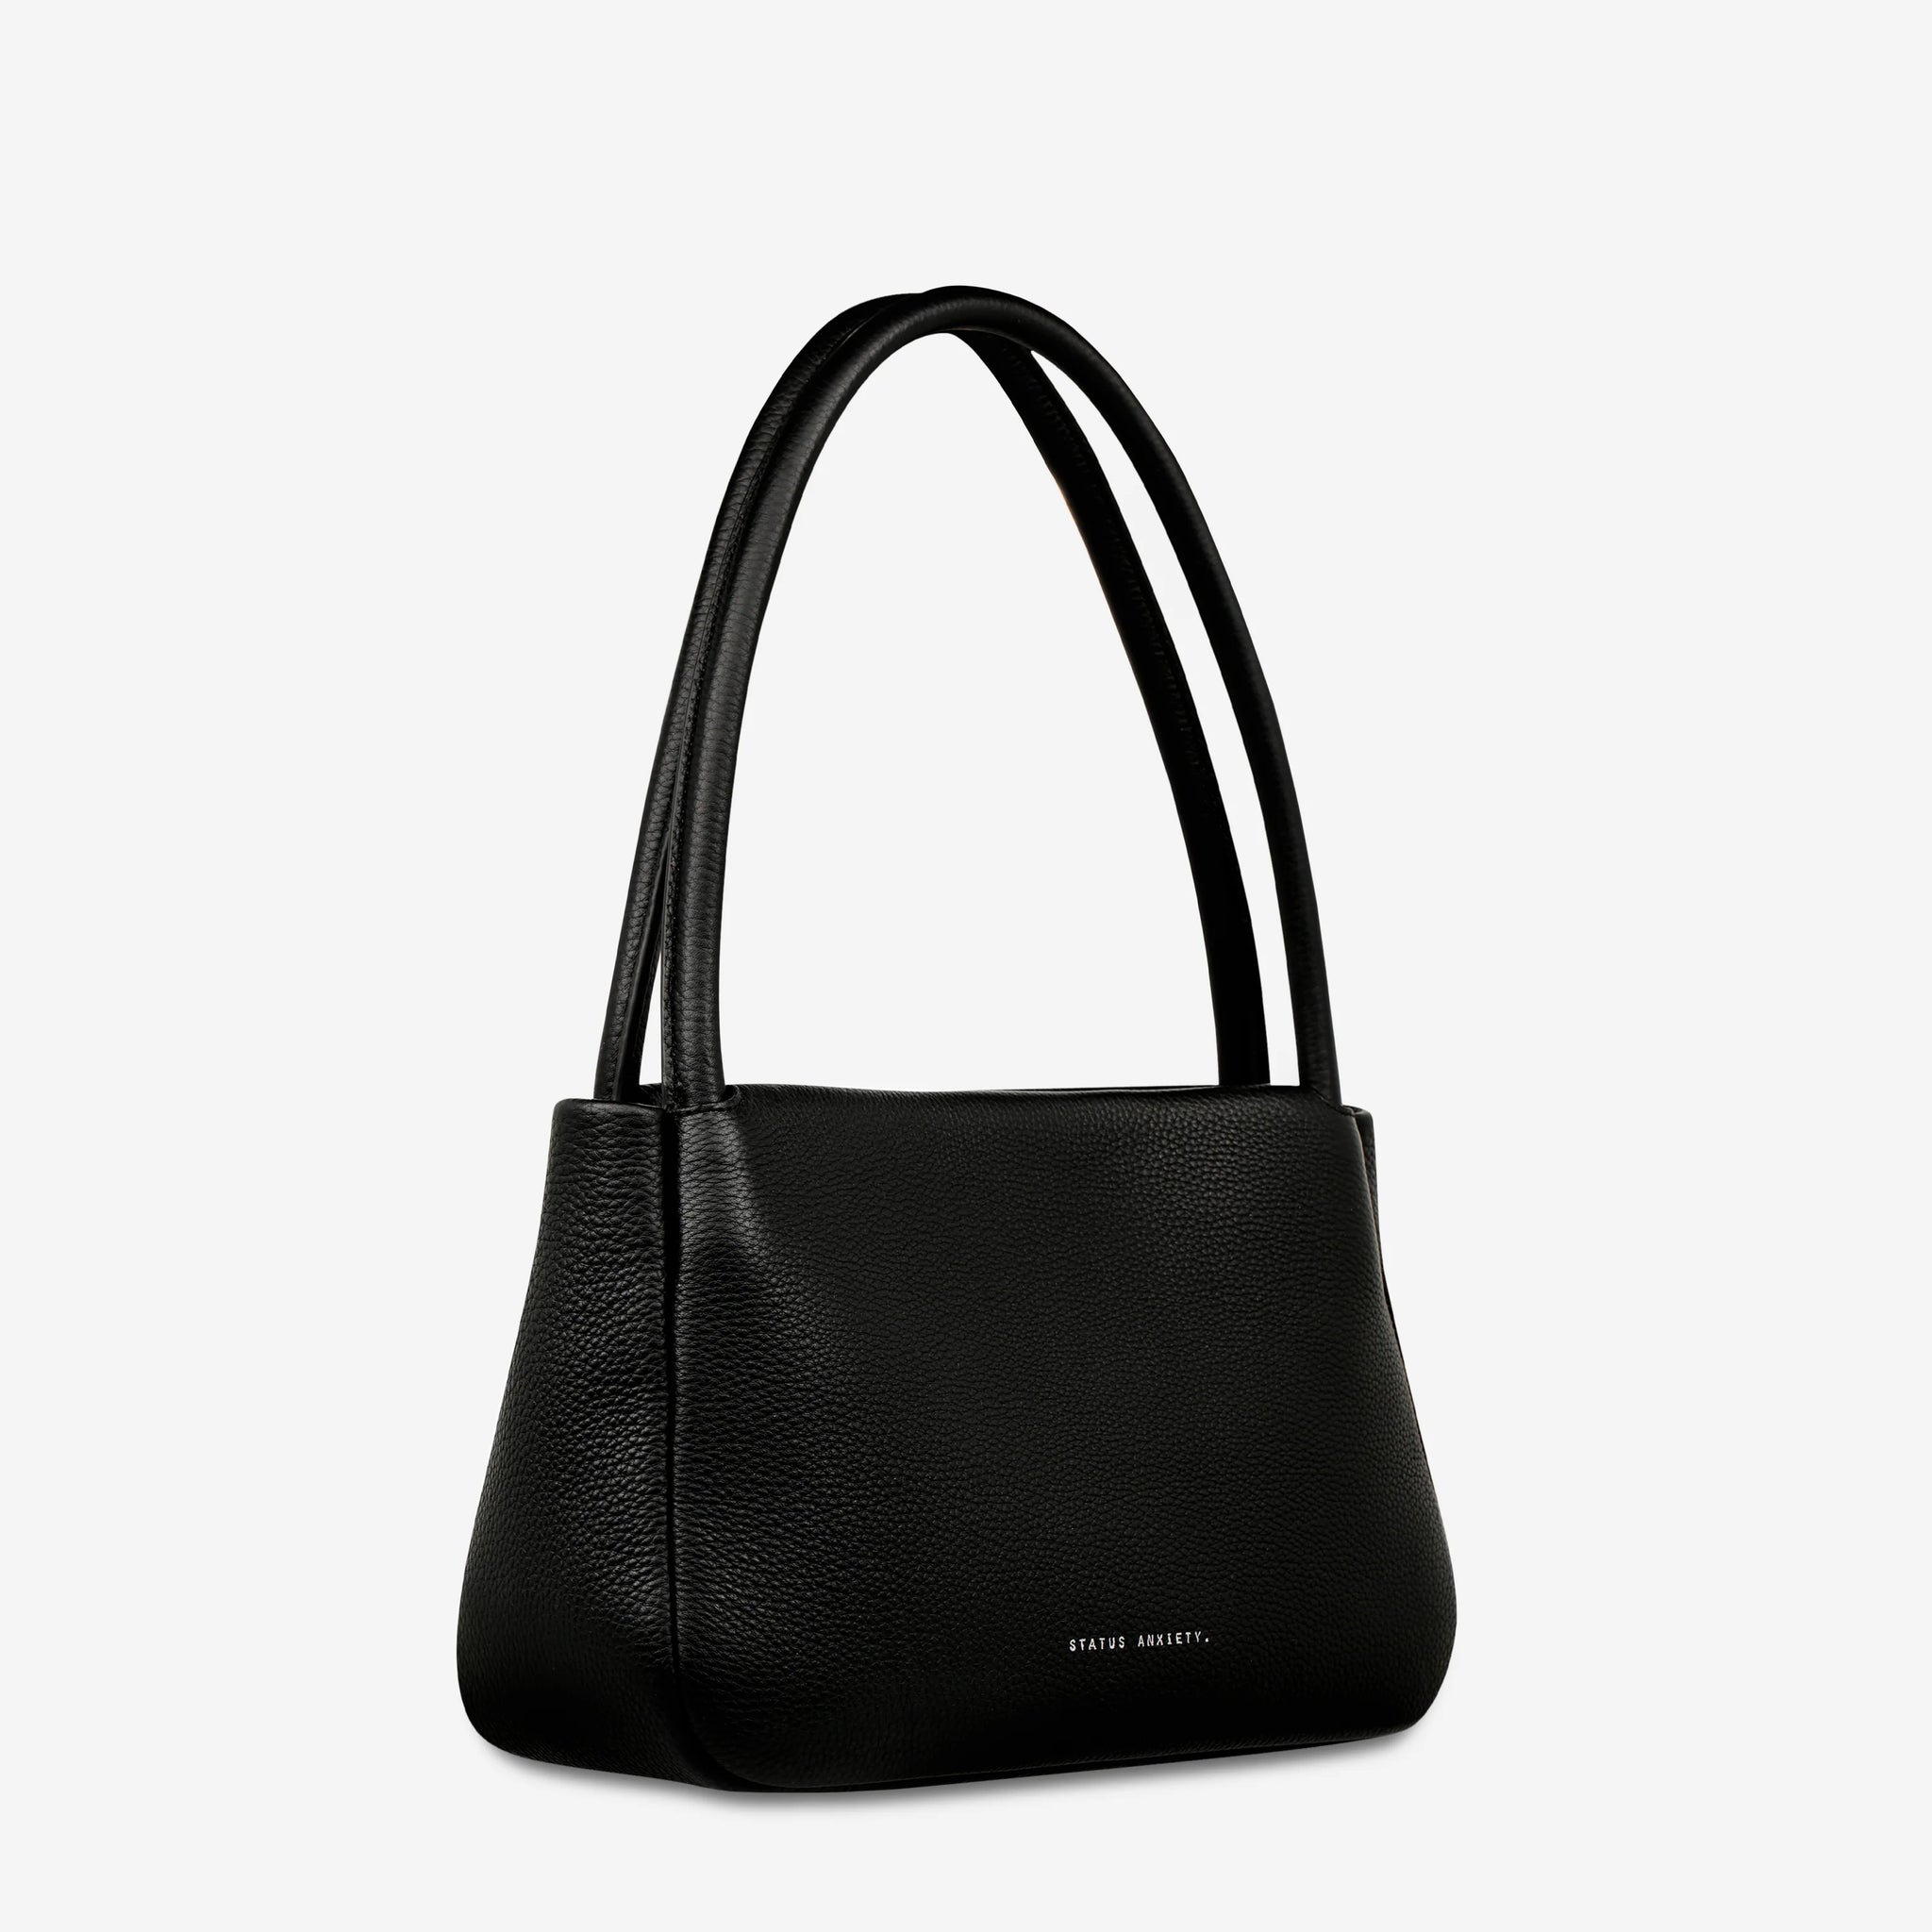 Status Anxiety Light of Day Bag - Black